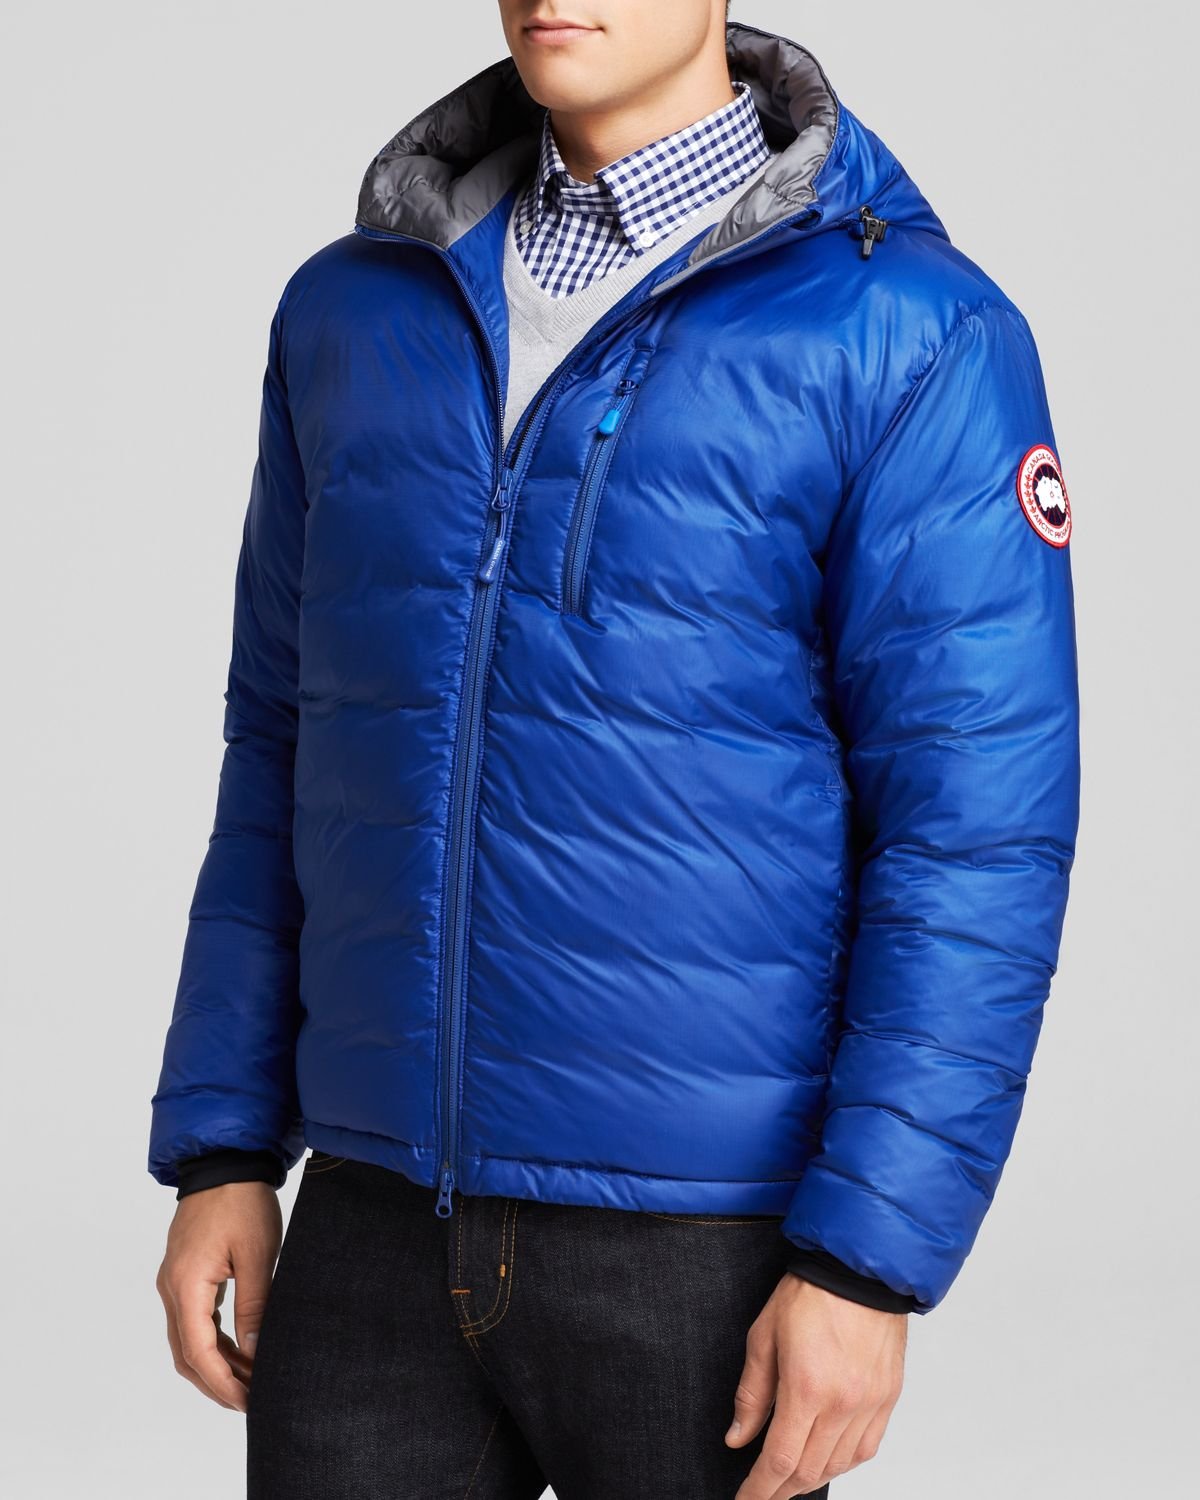 Lyst - Canada goose Lodge Hooded Down Jacket in Blue for Men